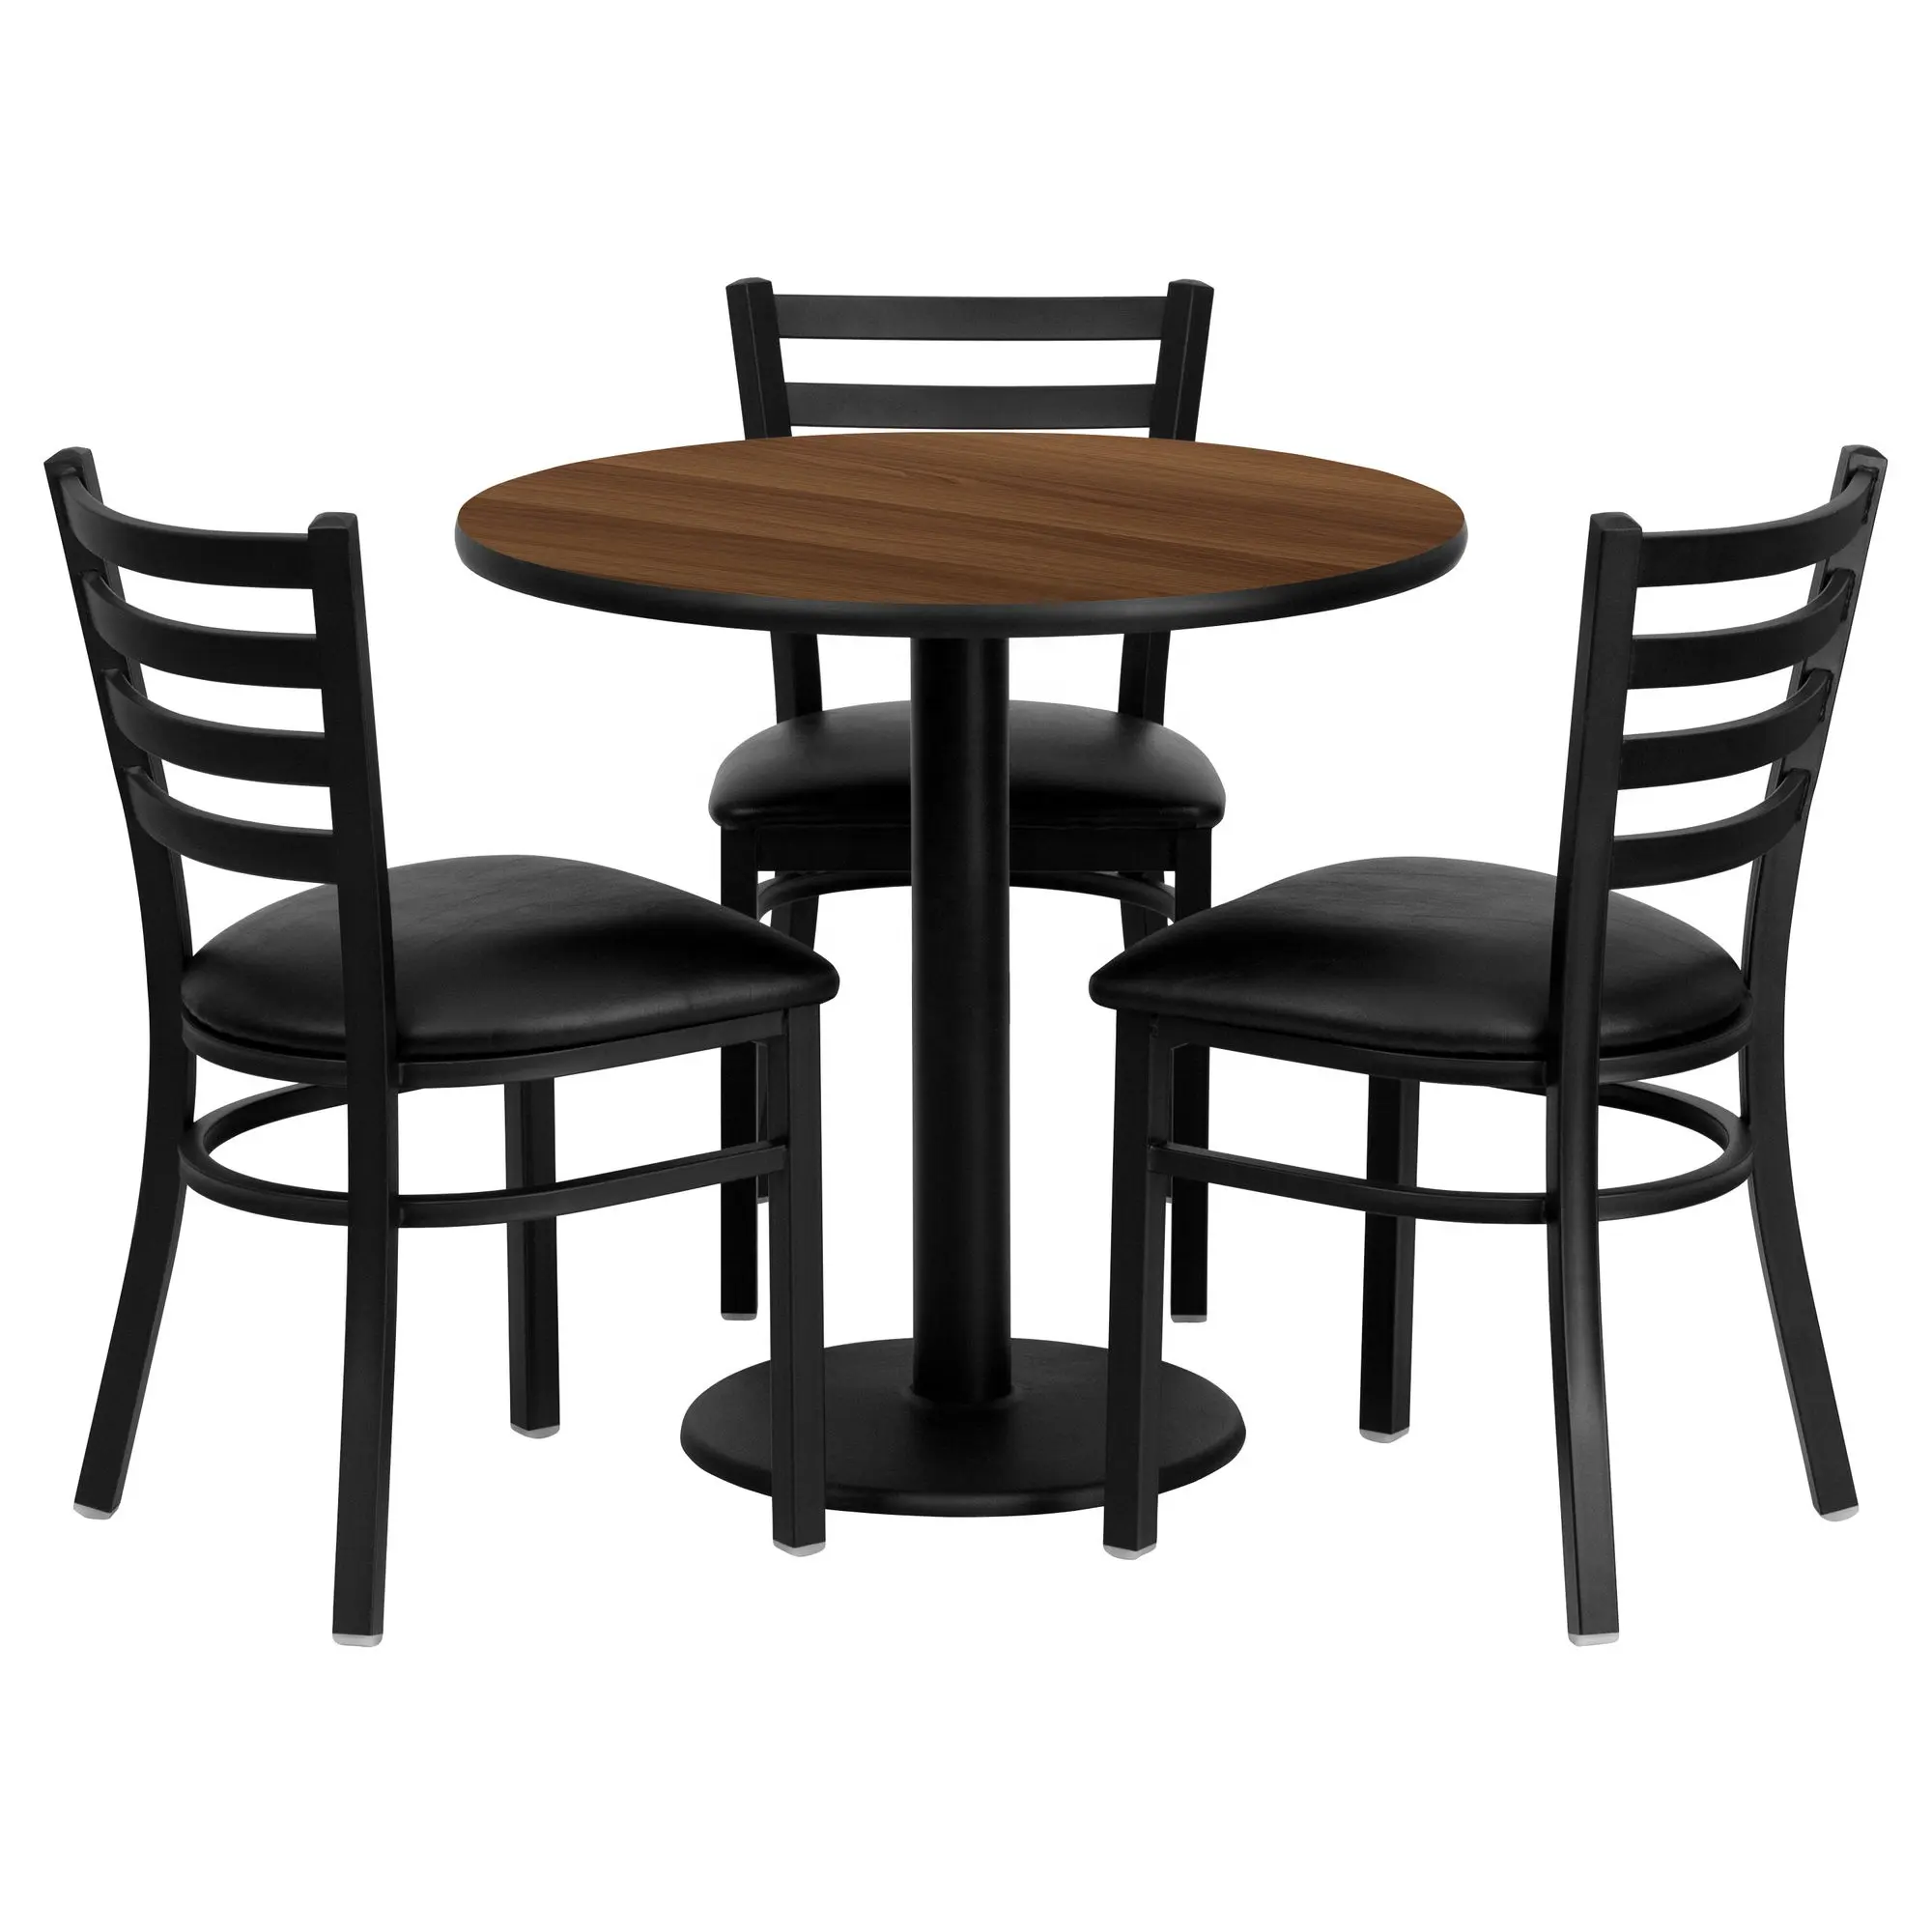 Full Set Modern Cheap mesas para restaurante Tables And Chairs mesas y sillas Wholesale Used Restaurant Furniture